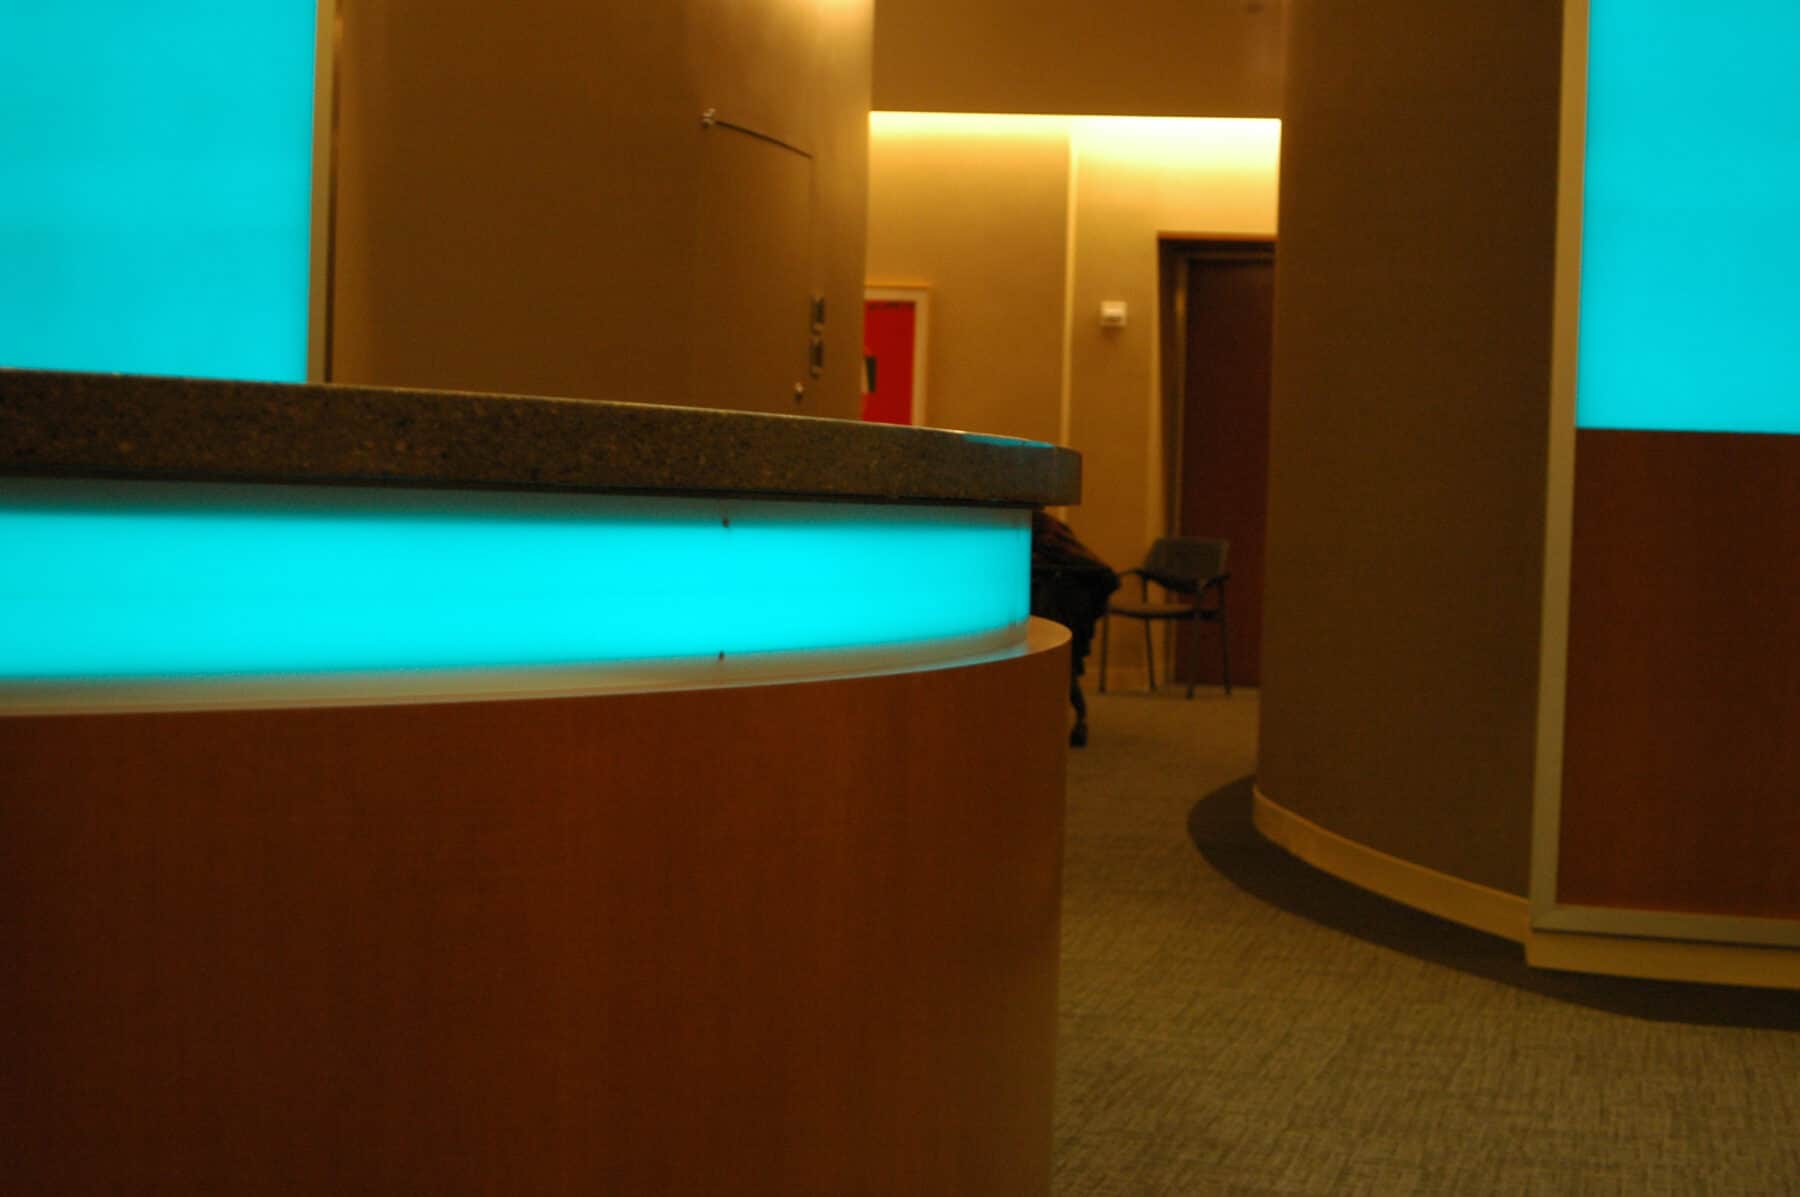 Architectural Backlit Glass Wall Panels and Circular Reception Desk for NBC Universal Studio at Rockefeller Center for Construction Specialty Projects by Commercial Builder & General Contractor Structural Enterprises